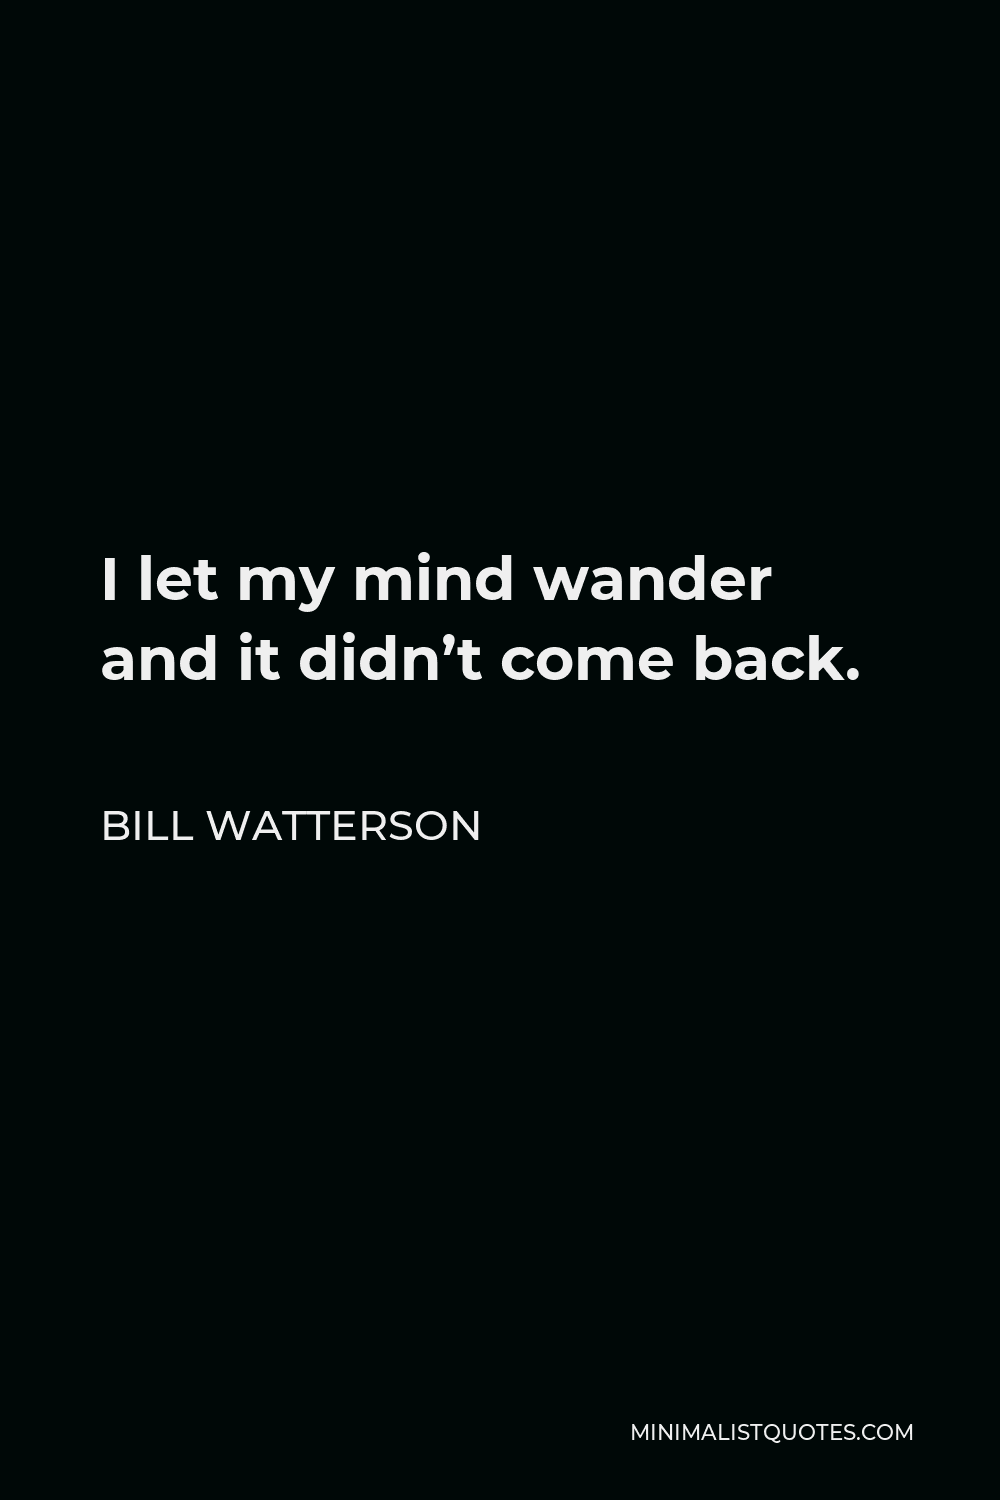 Bill Watterson Quote - I let my mind wander and it didn’t come back.